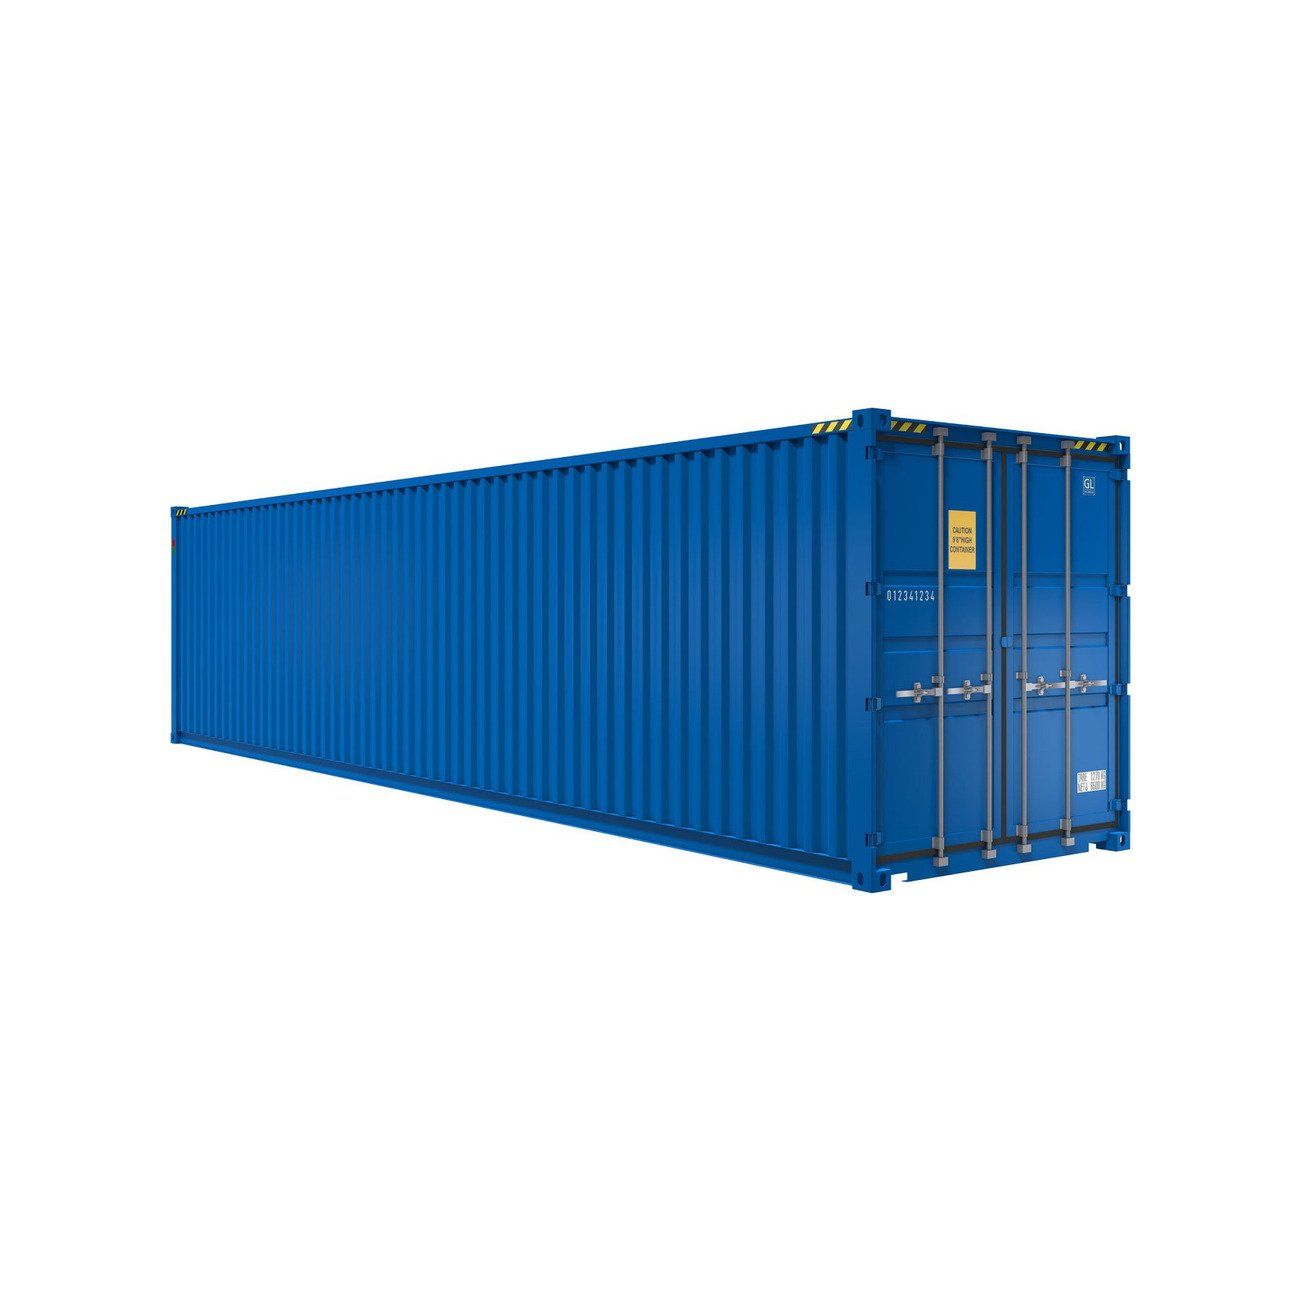 40’ HC CONTAINEX shippingcontainer